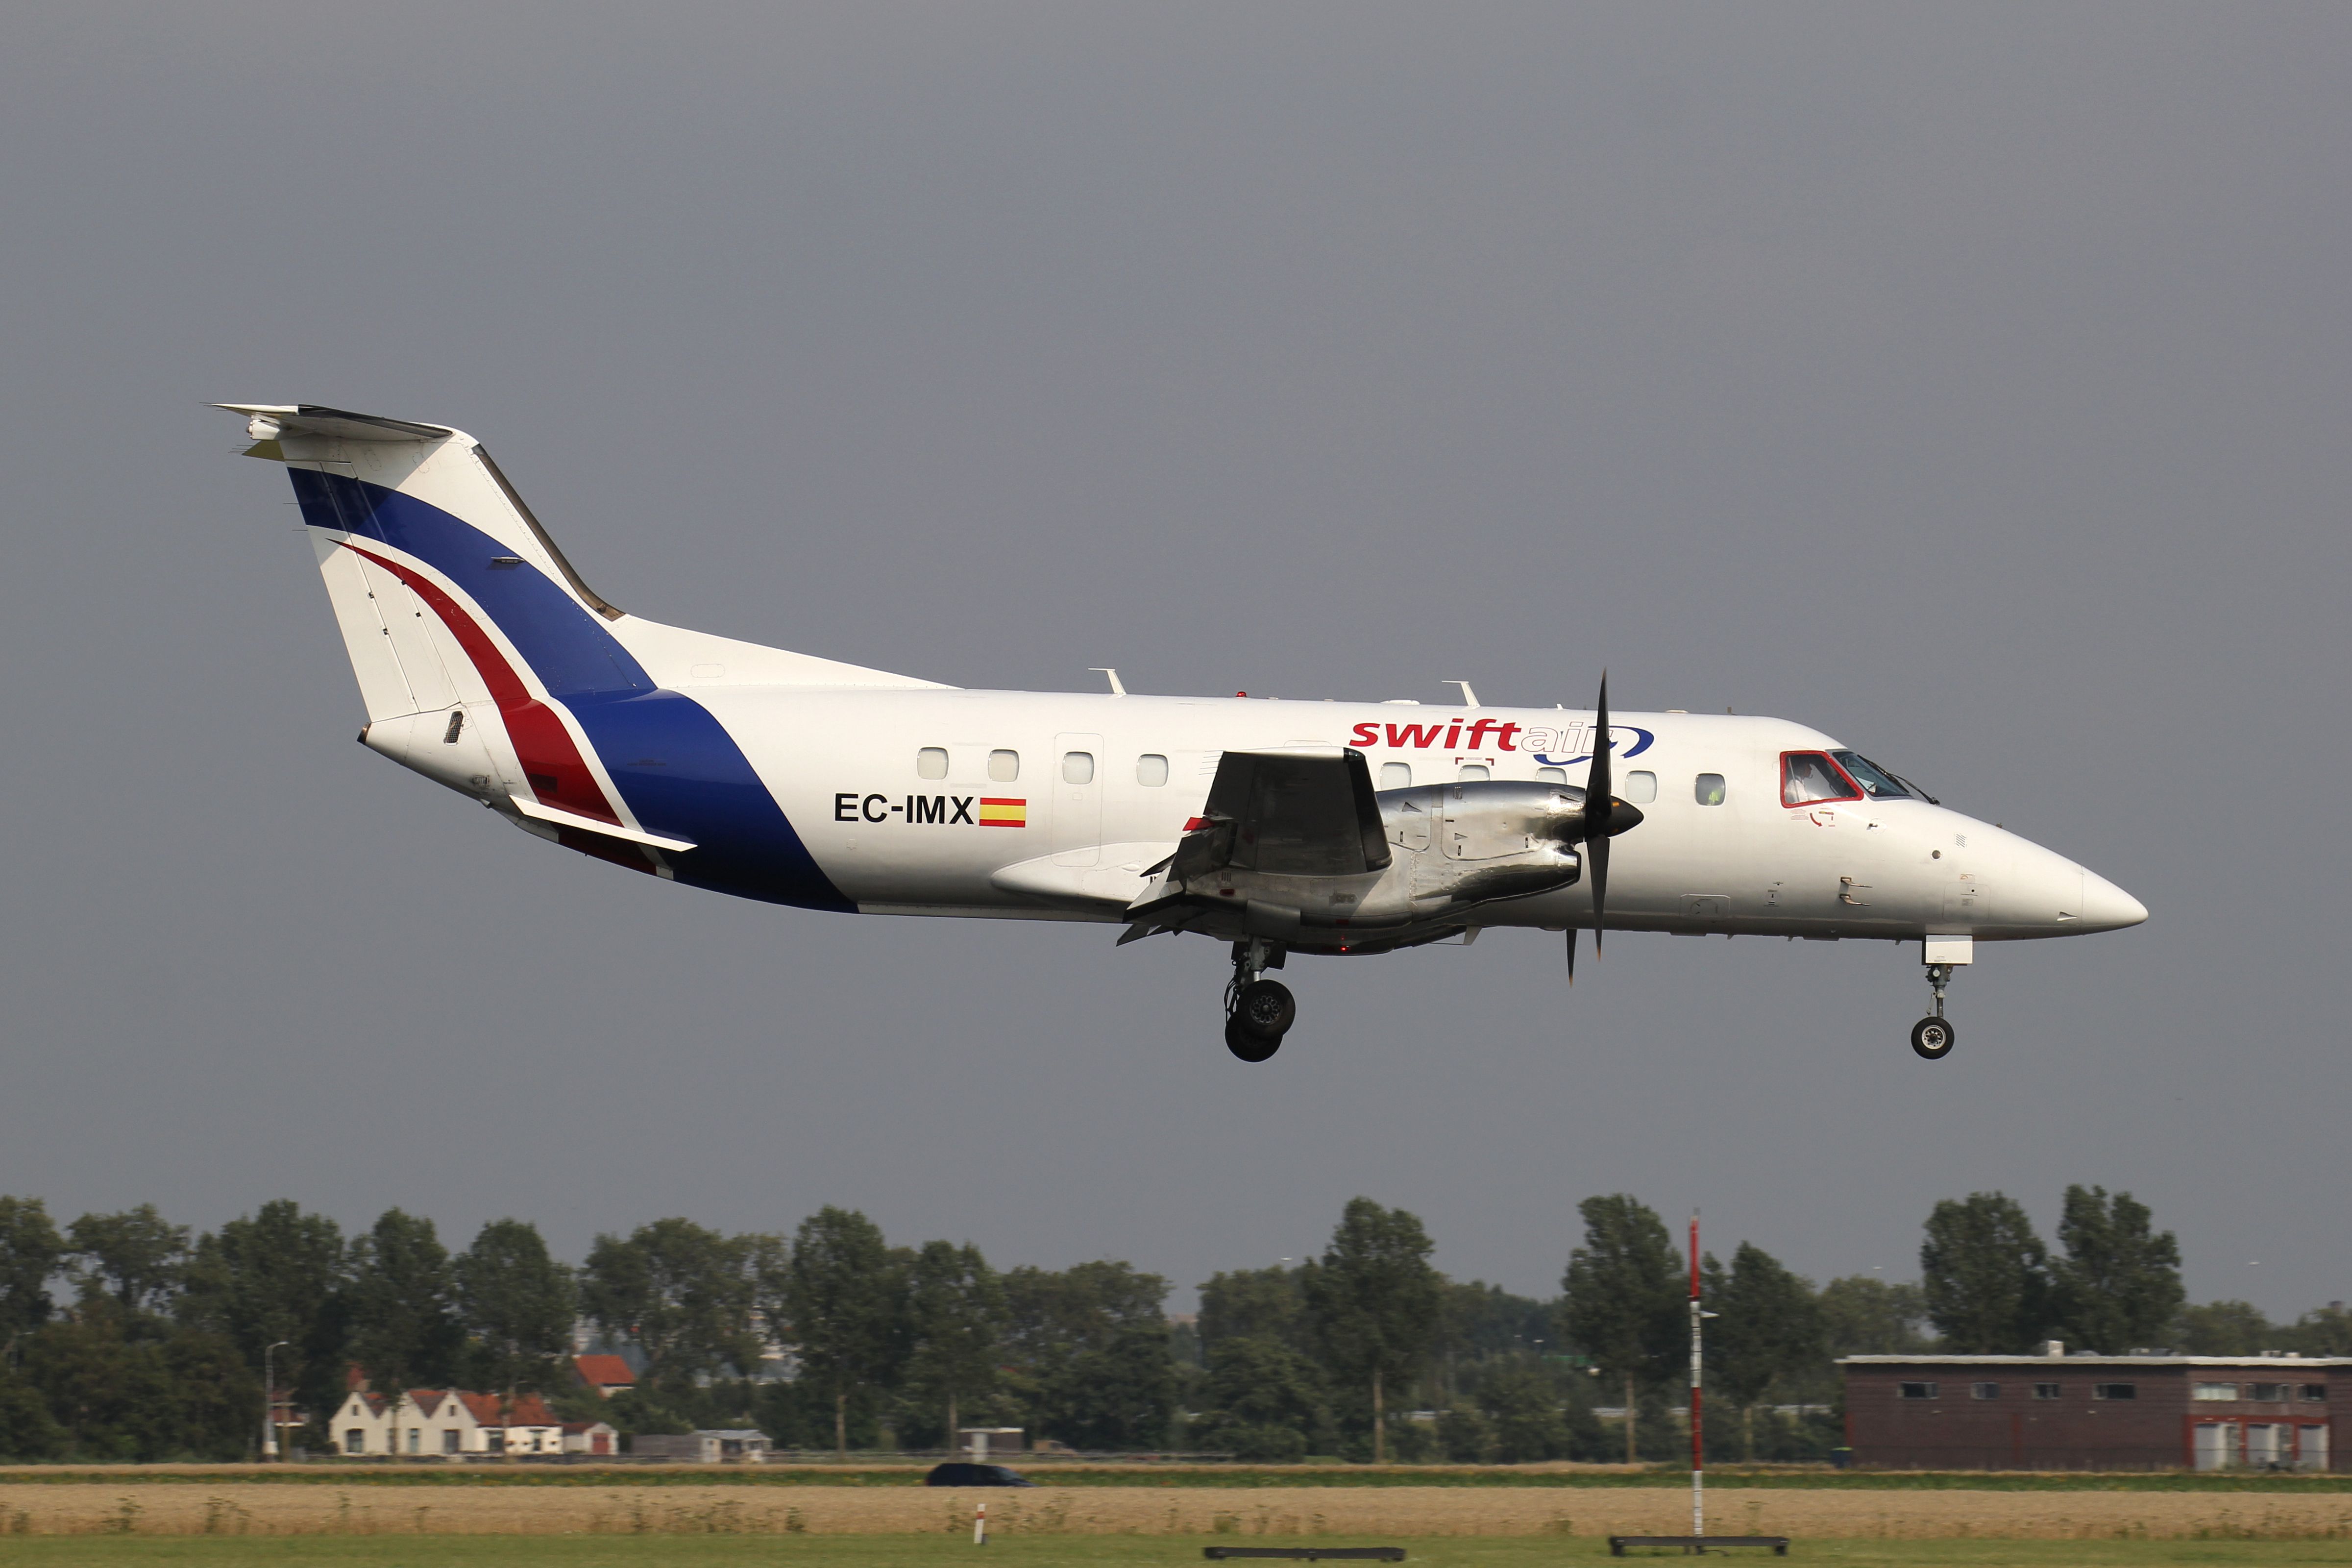 A Spanish Swiftair Embraer EMB-120 Brasilia about to land.